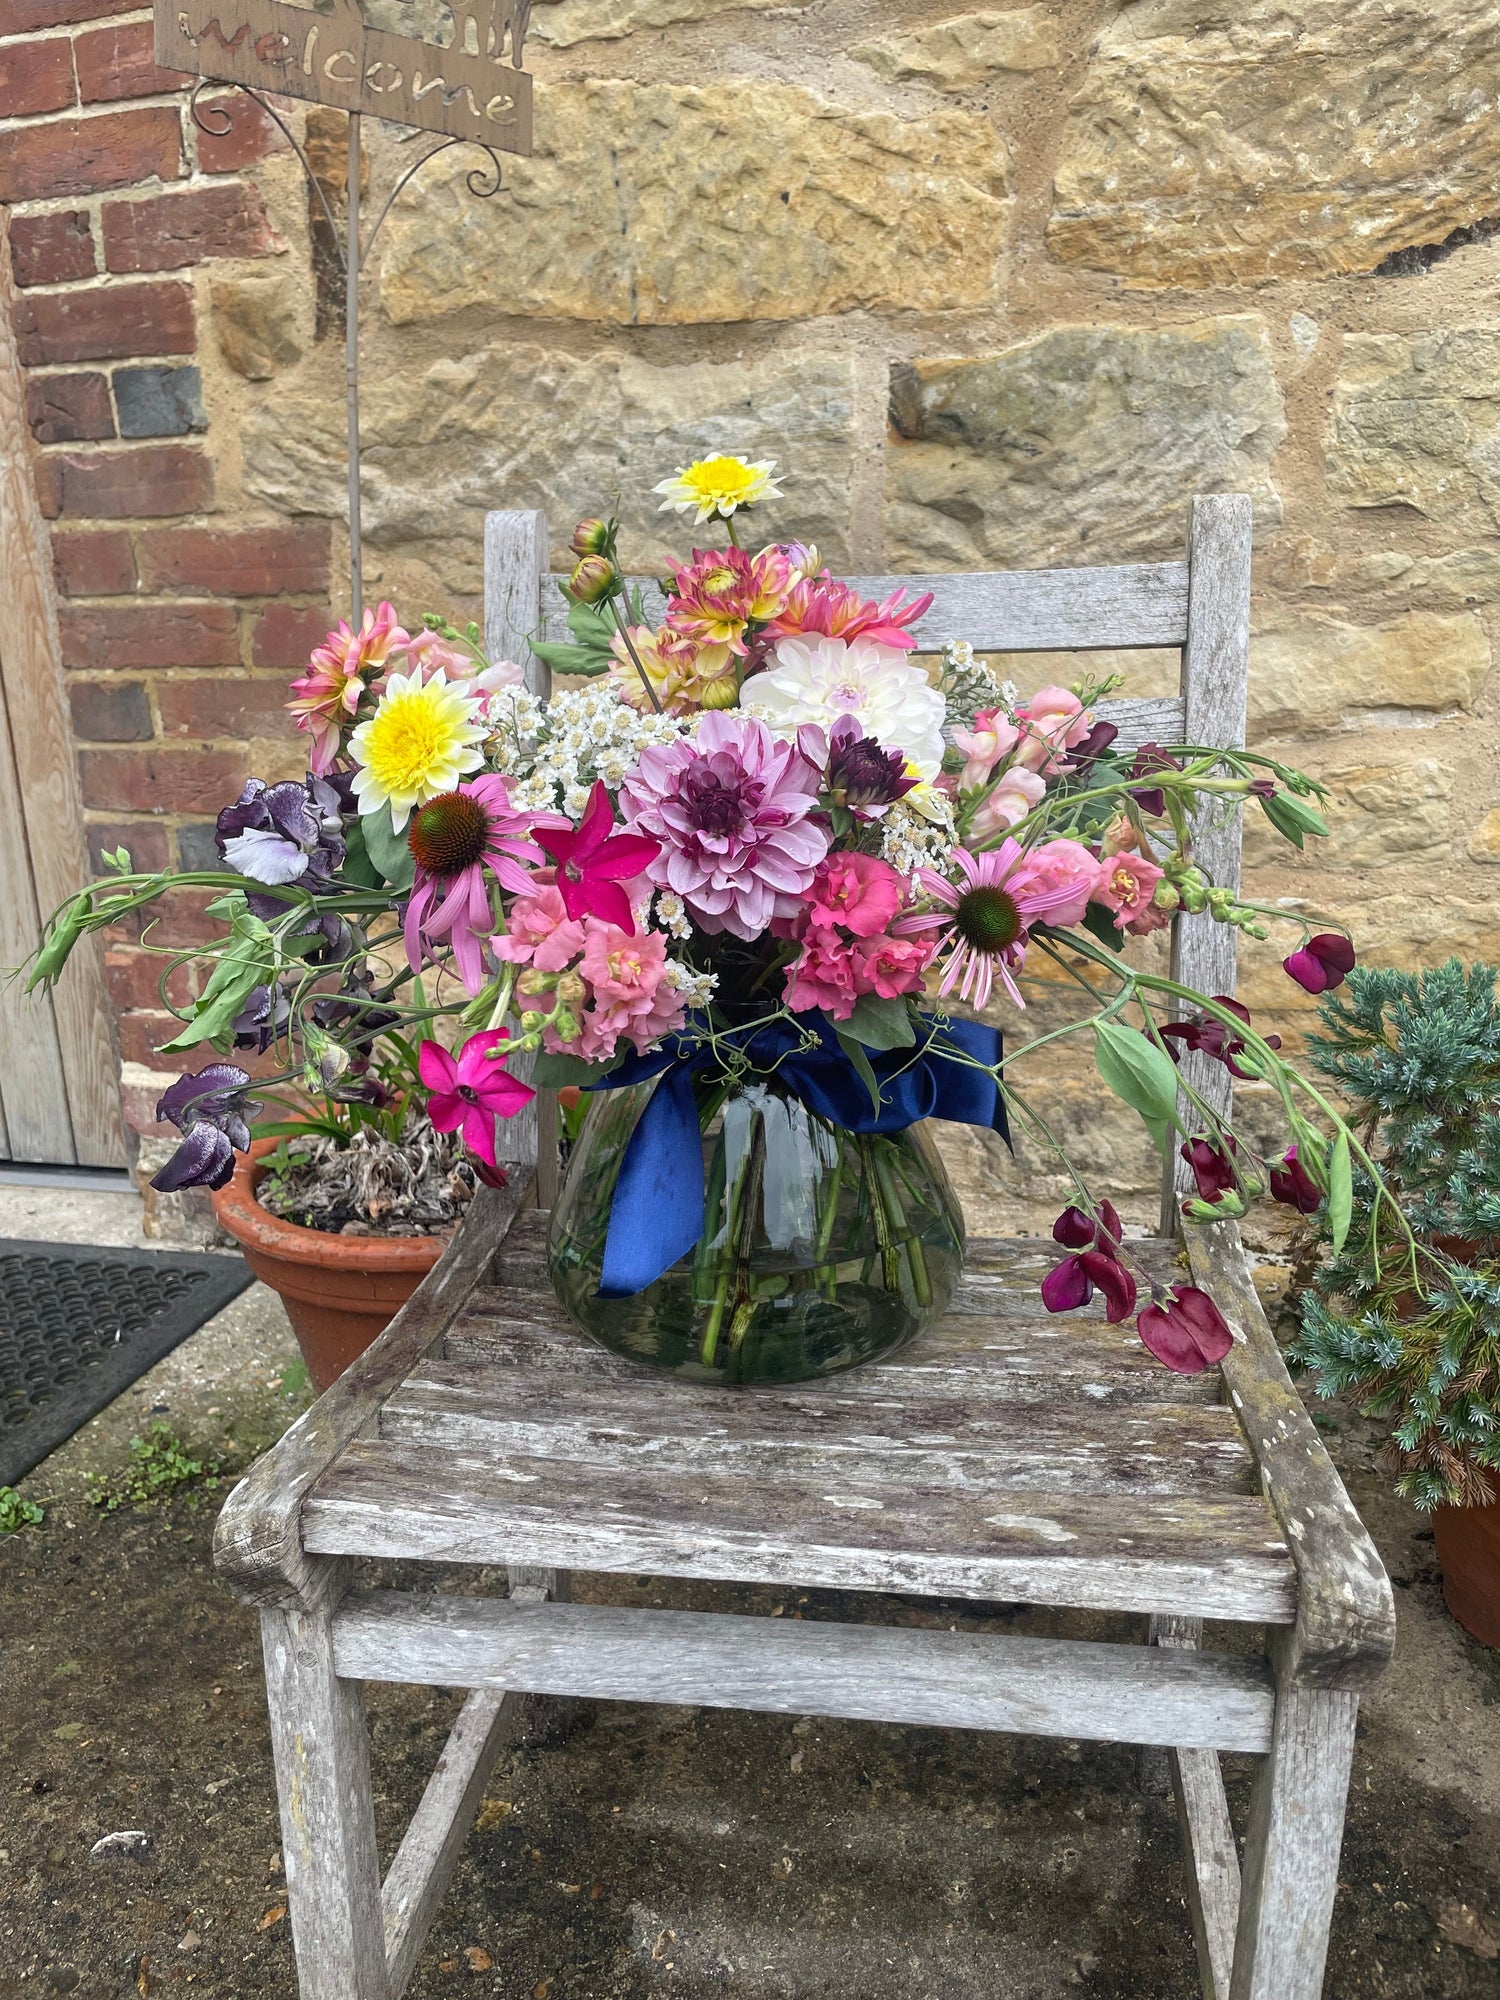 Large vase of flowers on chair